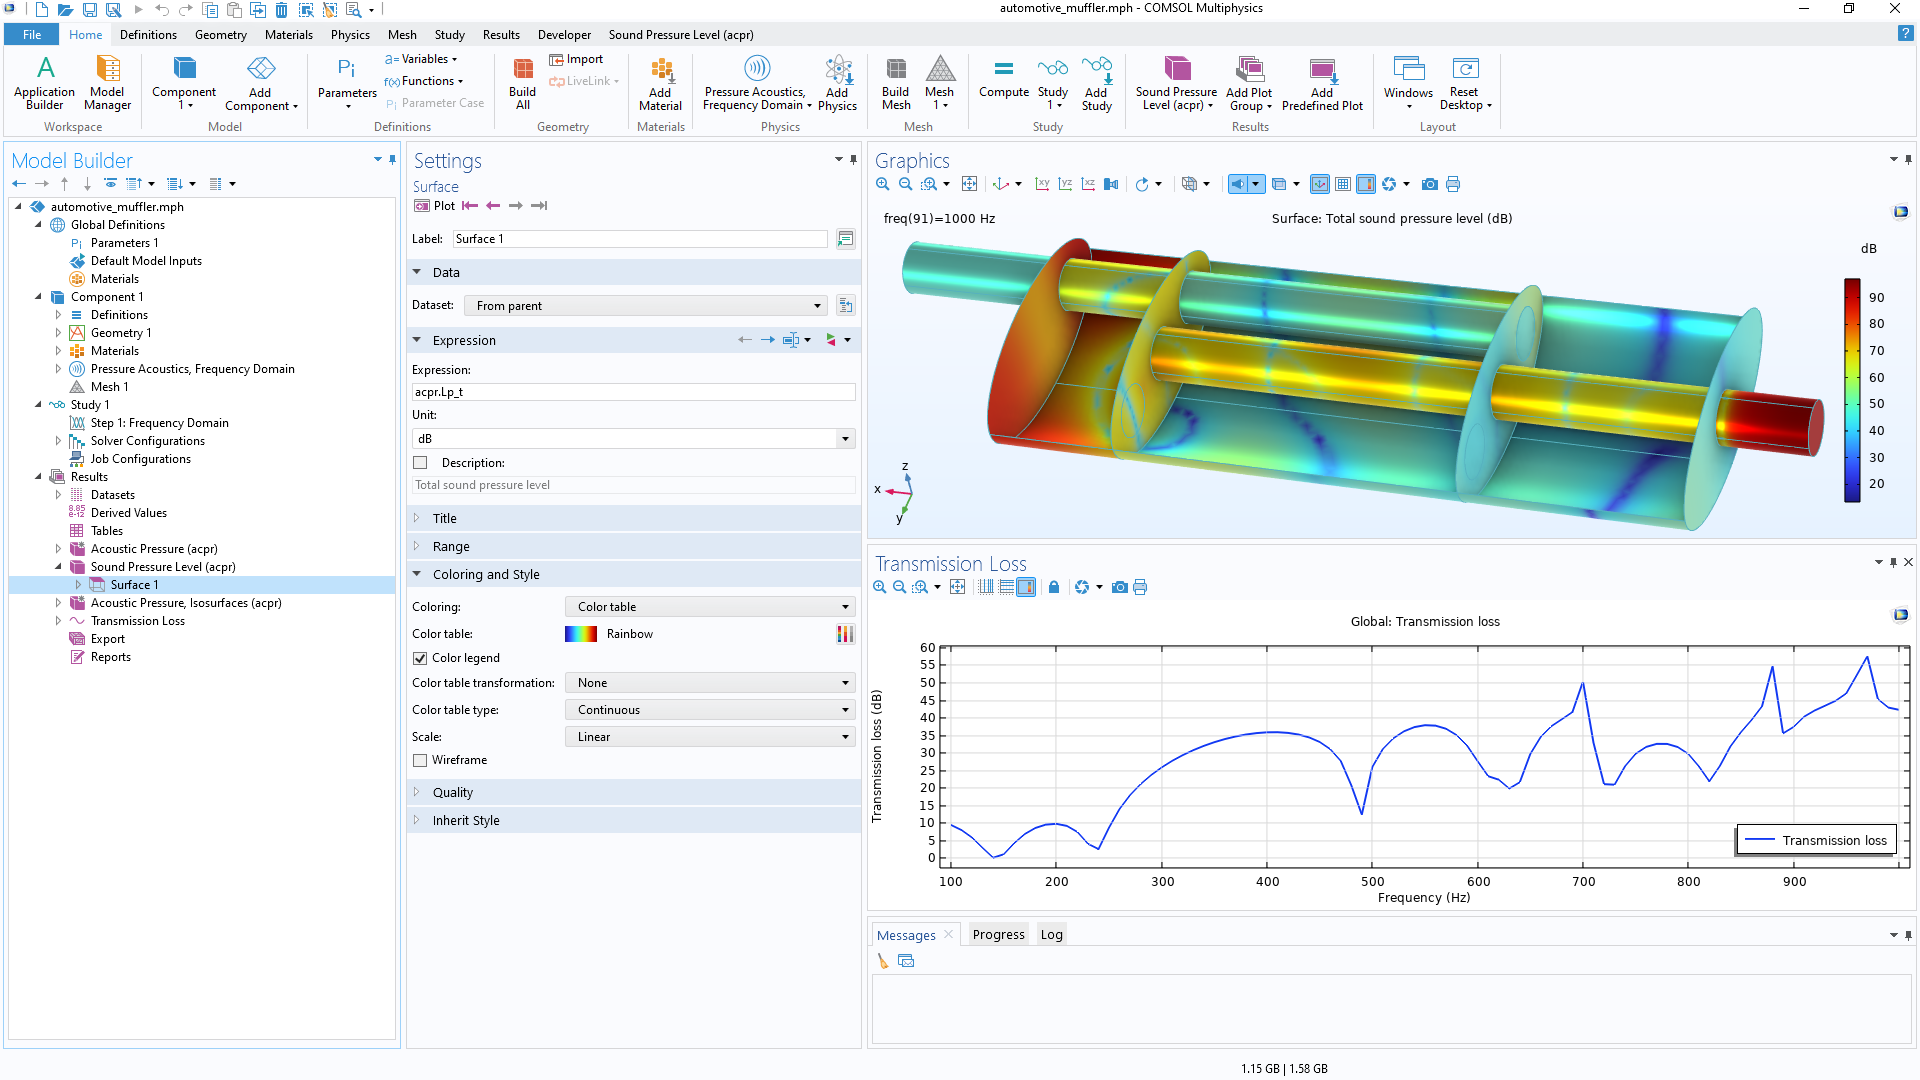 An example of using the built-in visualization tools in COMSOL Multiphysics.